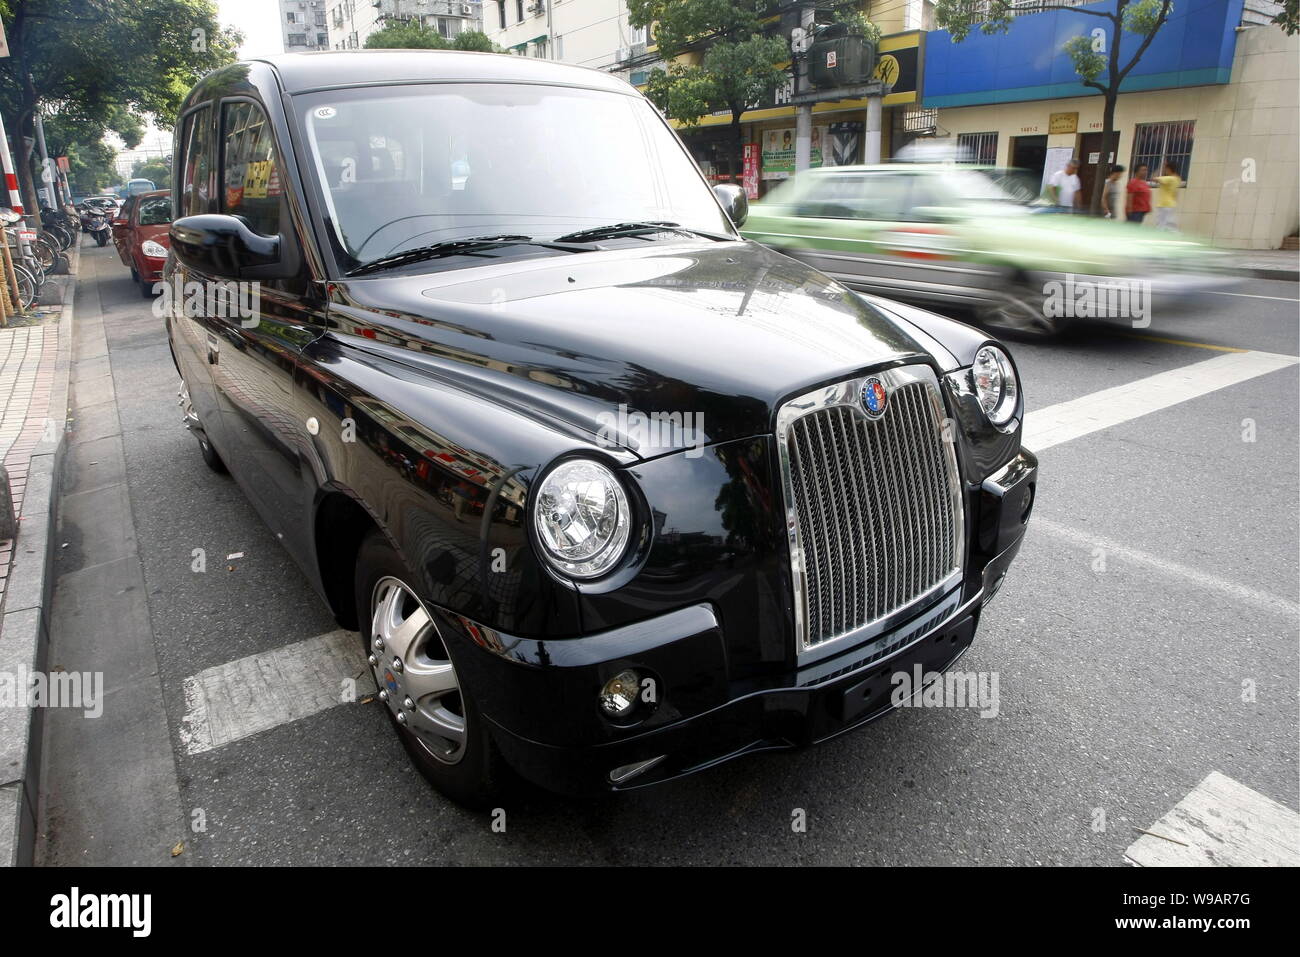 A Geely TX4 is seen in a street in Shanghai, China, July 21, 2010.   Manganese Bronze Holdings Plc, maker of the iconic London black cab, wanted to ti Stock Photo